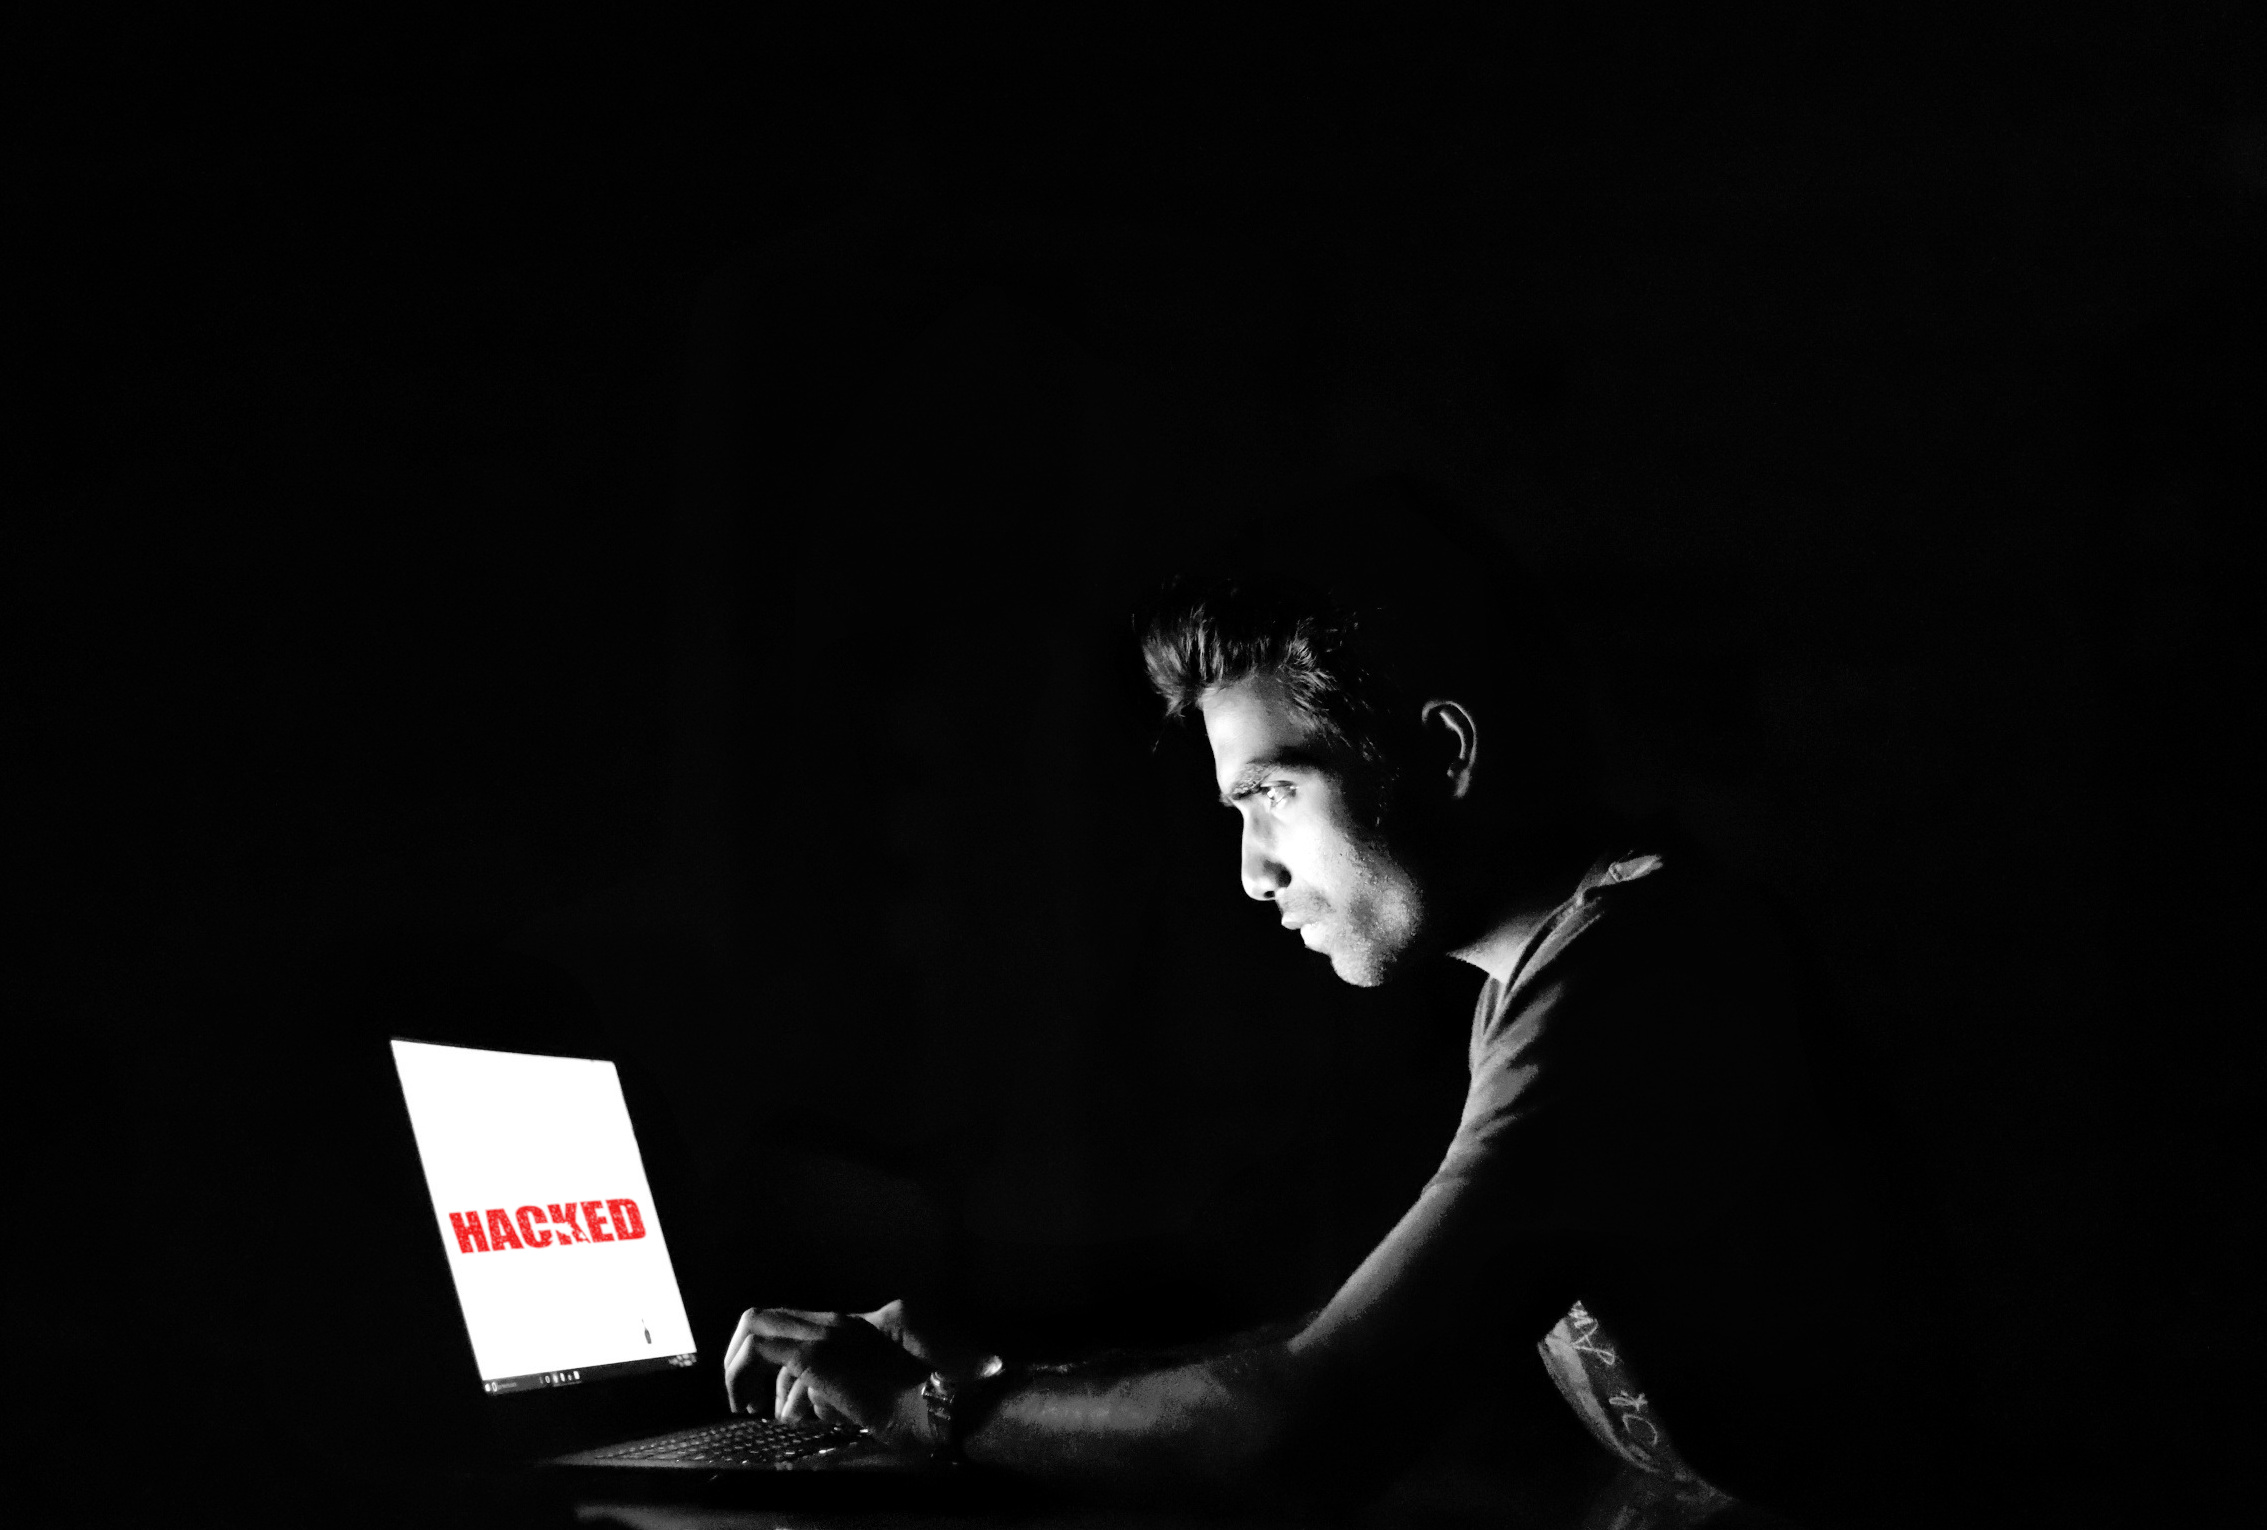 Australia Cyber Attacks on the Rise - Feature